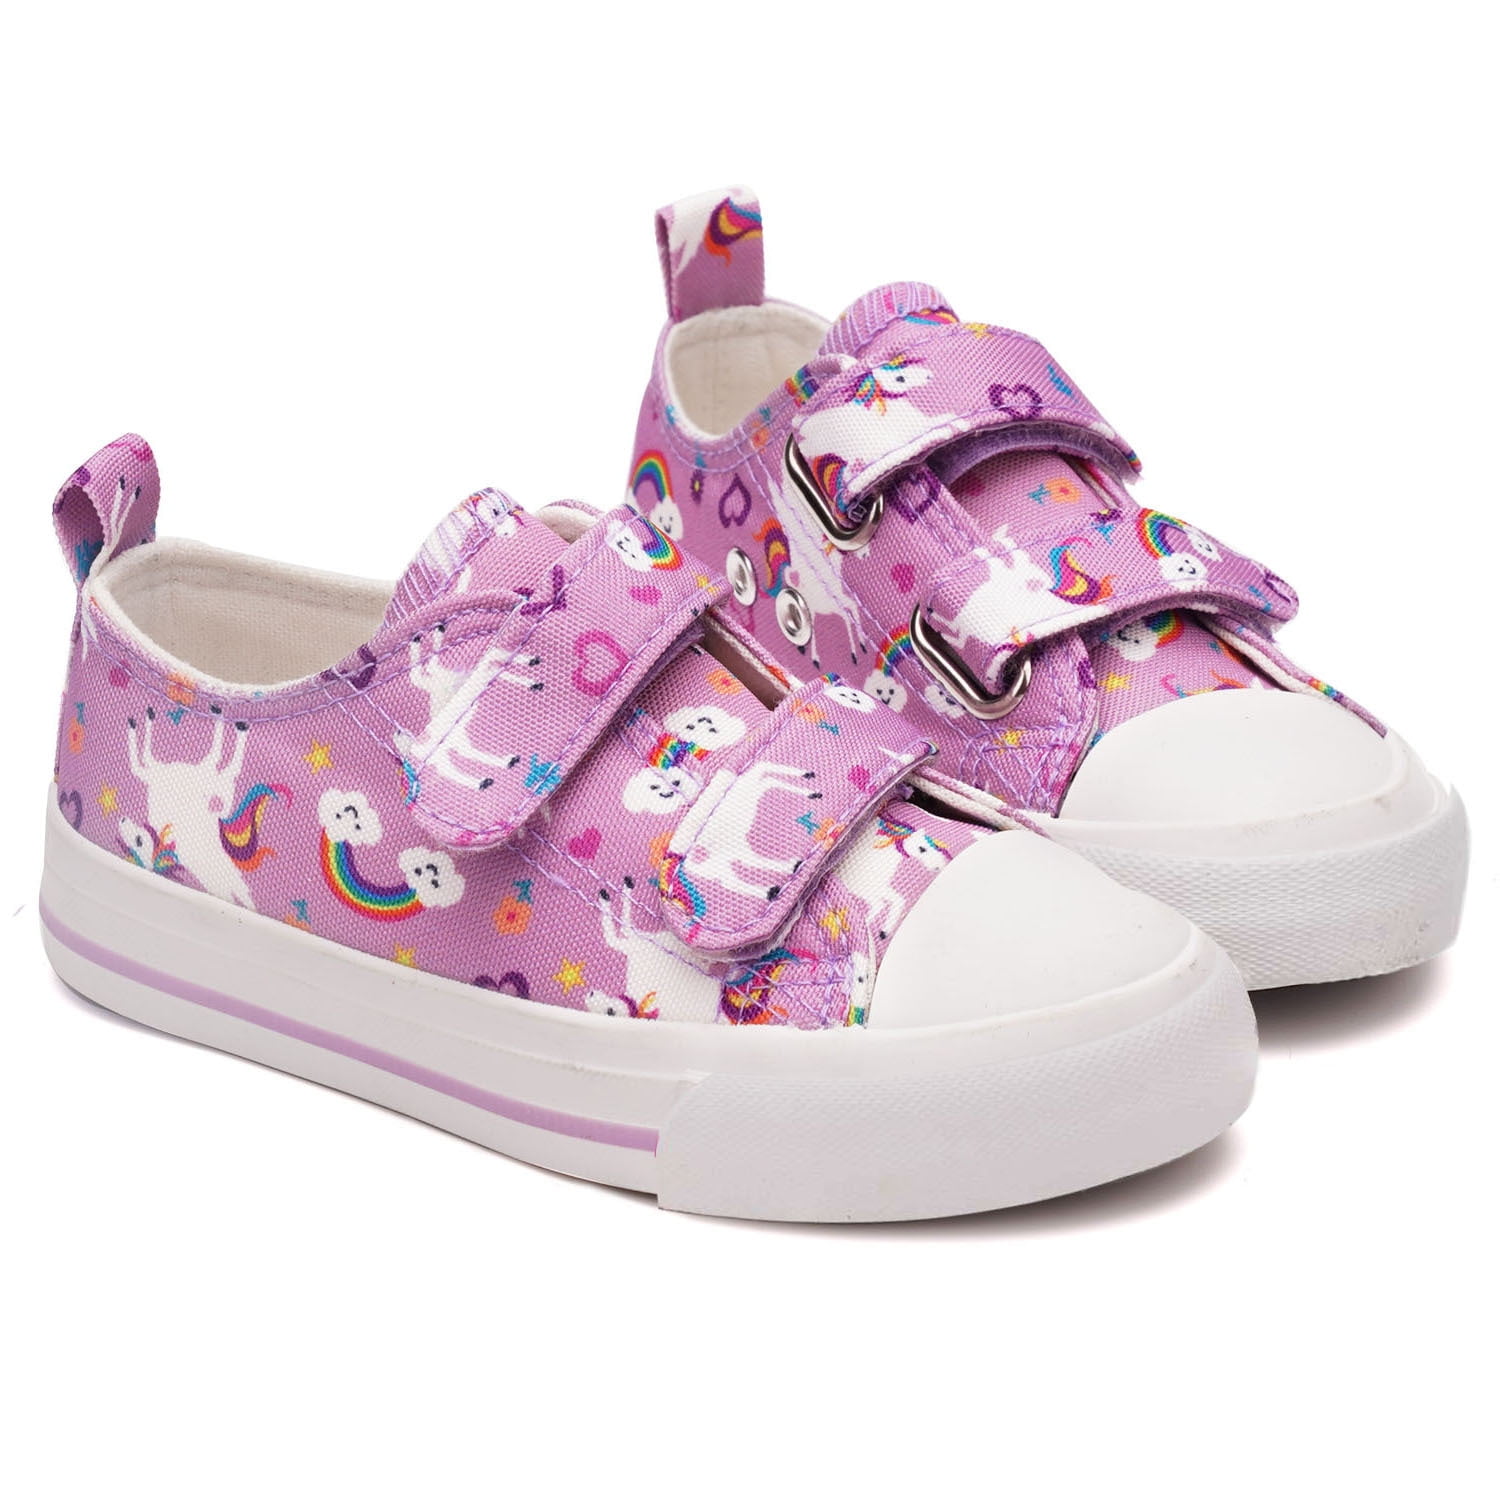 Toandon Adorable Adjustable Strap Canvas Sneakers for Toddler and Kids 